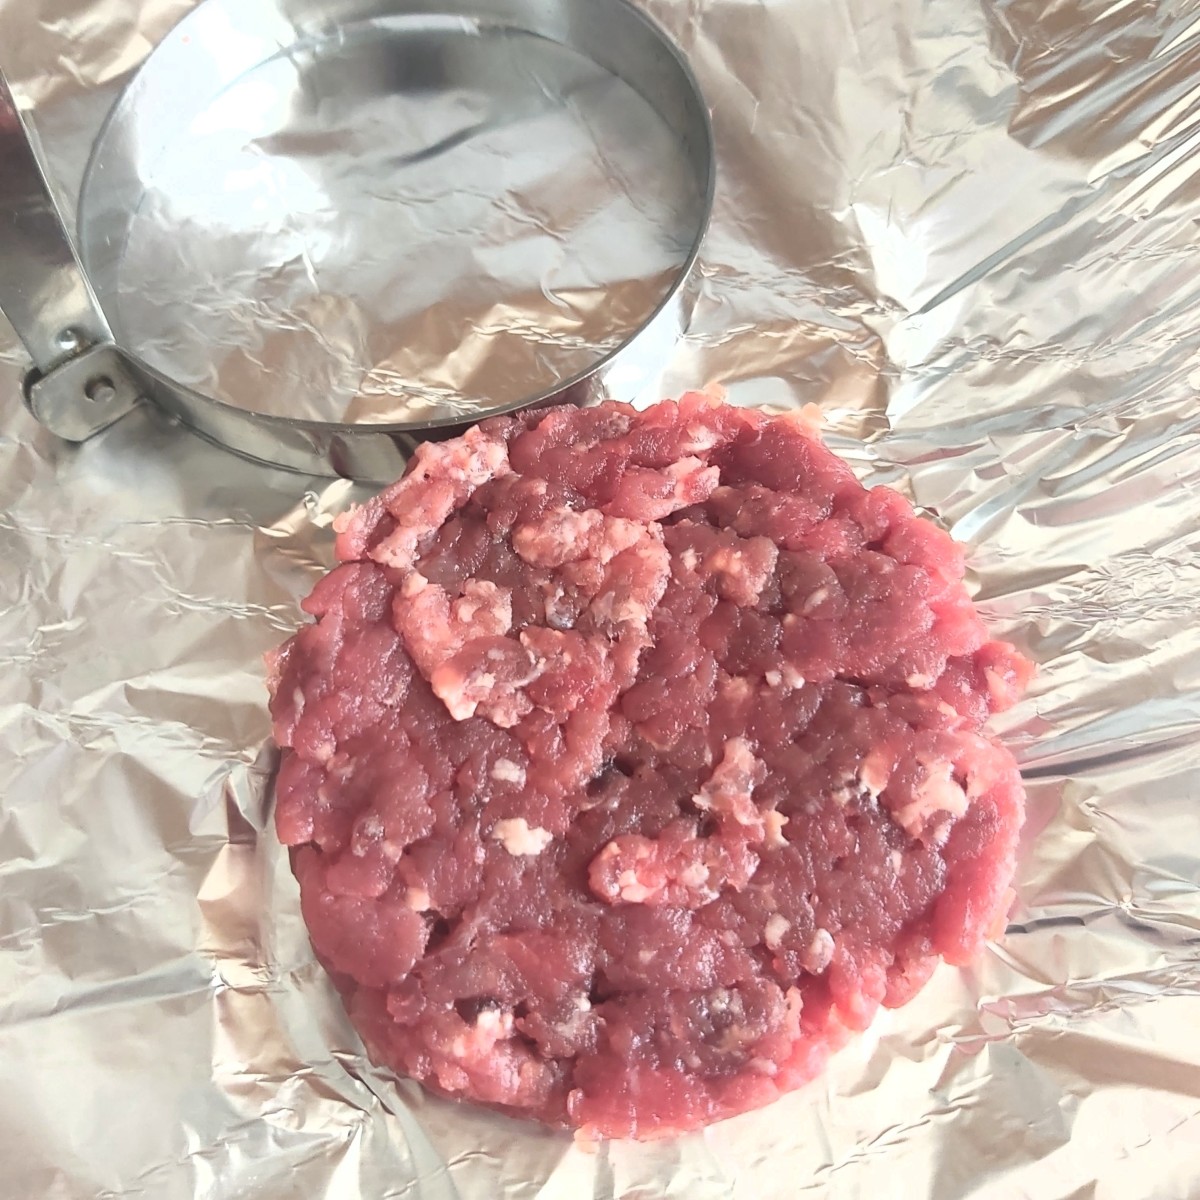 You can make beef burgers using beef sausages 